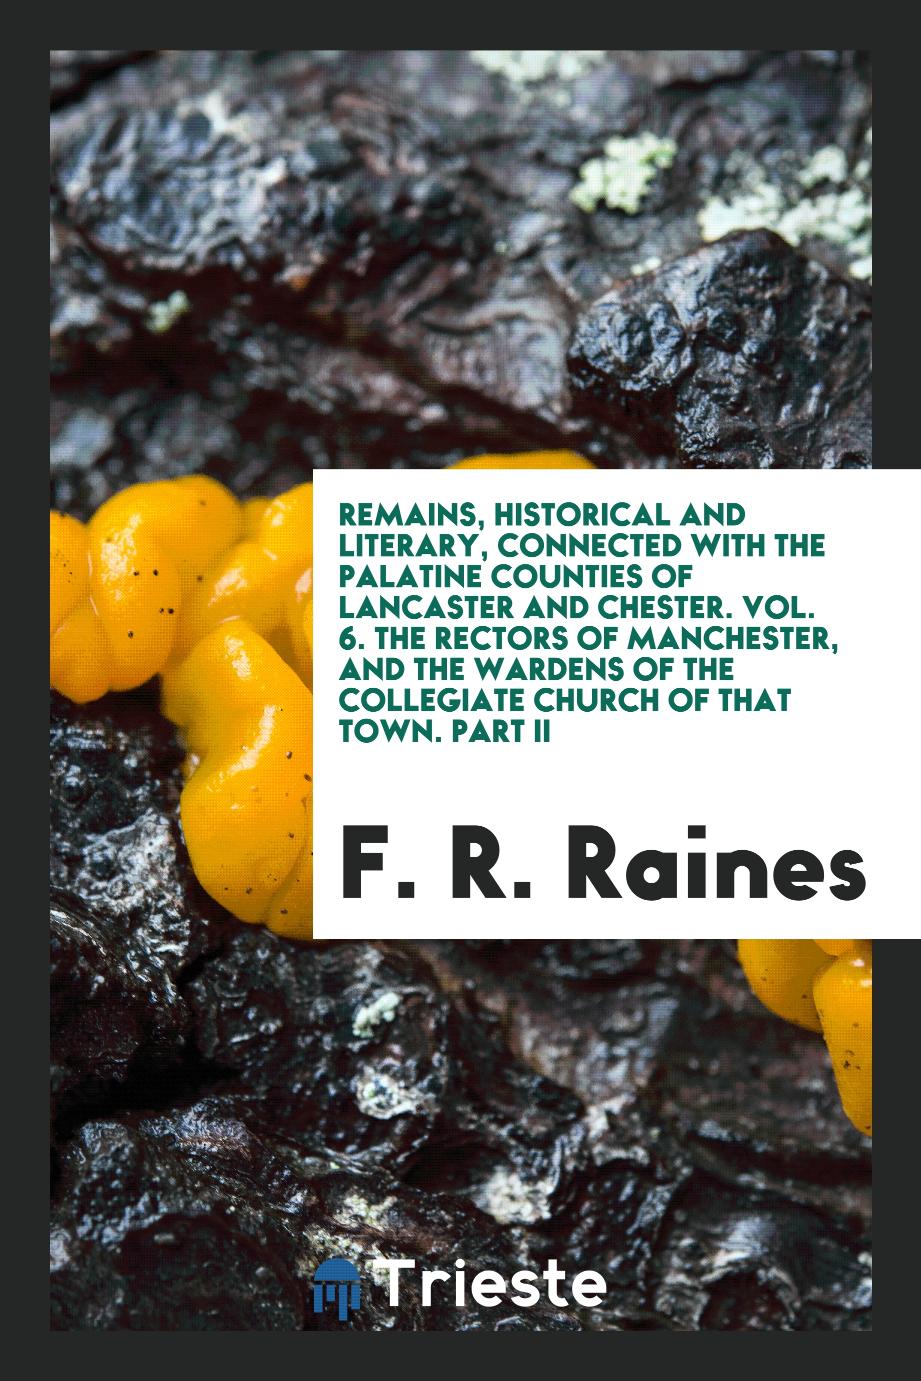 Remains, Historical and Literary, Connected with the Palatine Counties of Lancaster and Chester. Vol. 6. The Rectors of Manchester, and the Wardens of the Collegiate Church of That Town. Part II